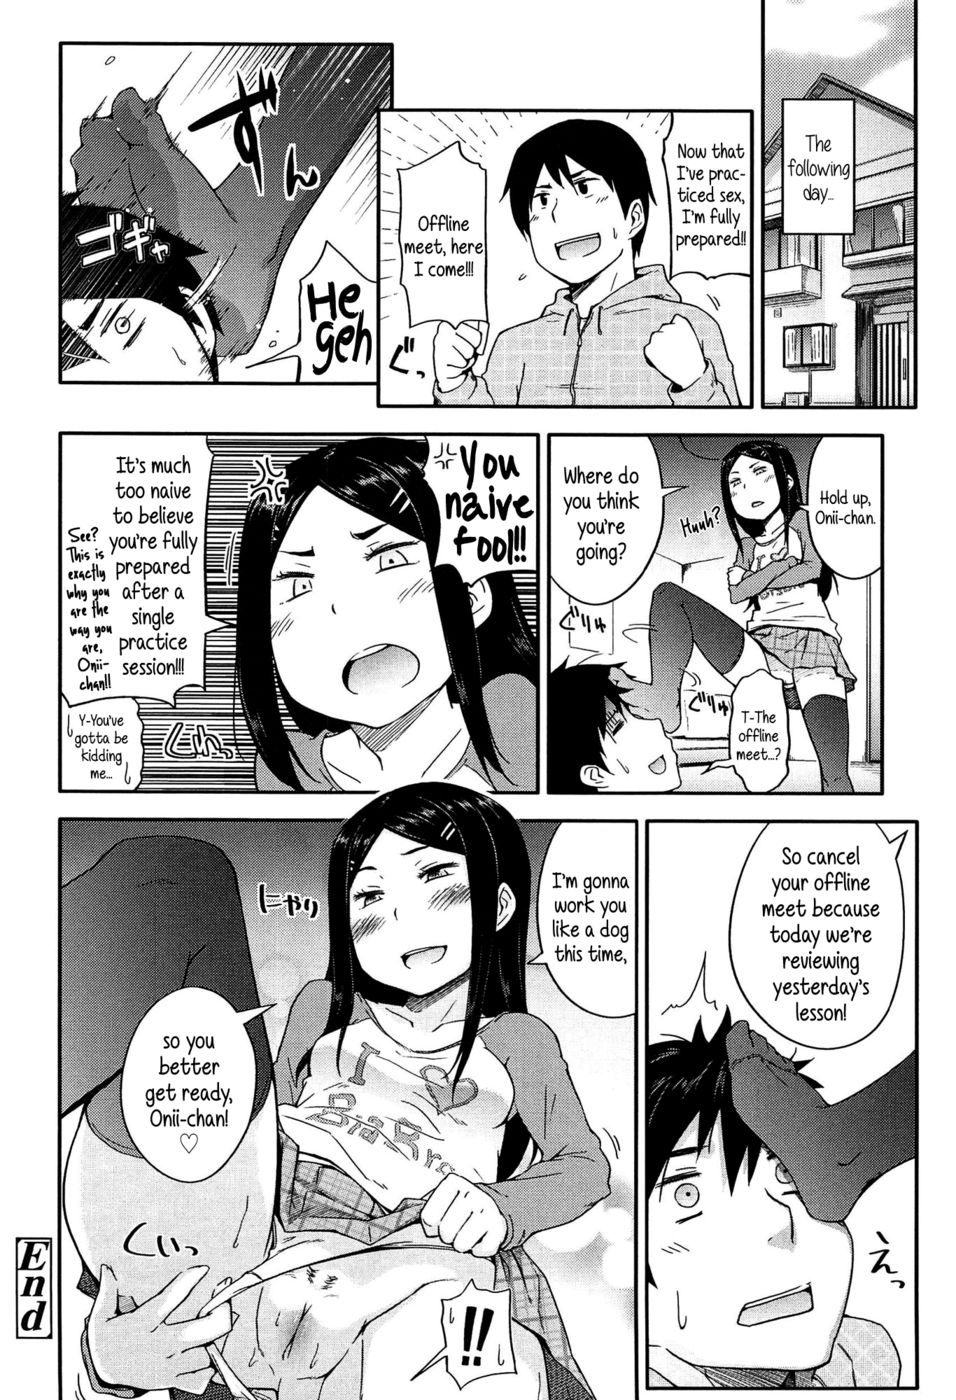 Hentai Manga Comic-I Know, I'll Practice With my Little Sister.-Read-20